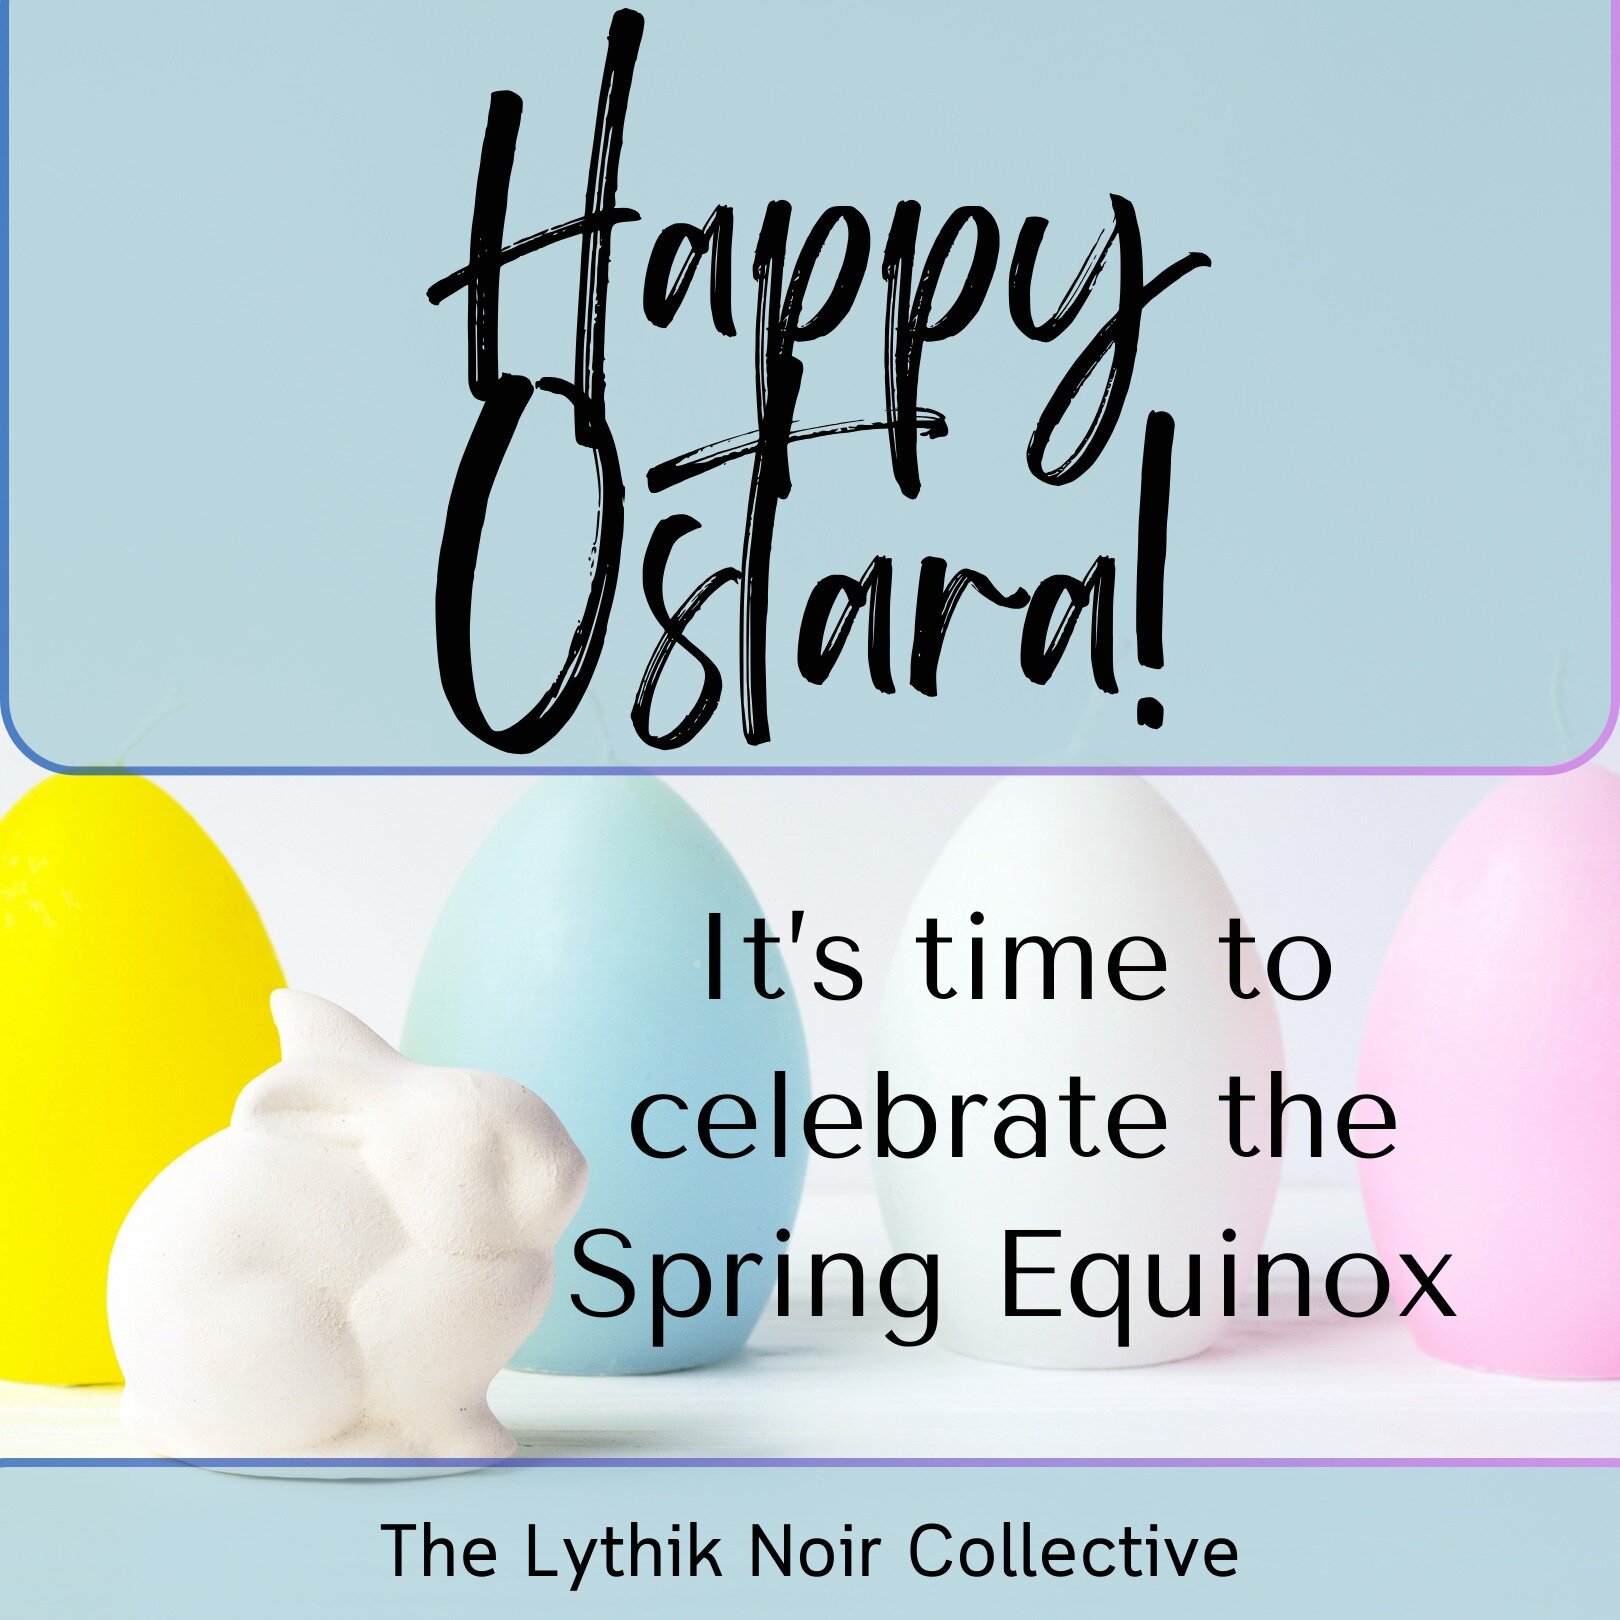 🐣 Happy Ostara! 🐣

🌞 Ostara is the celebration of the Spring Equinox taking place between March 19th and 22nd. We celebrate the warmth of the sun as it awakens the earth from its winter slumber. For those who are also looking at a snow-covered bac